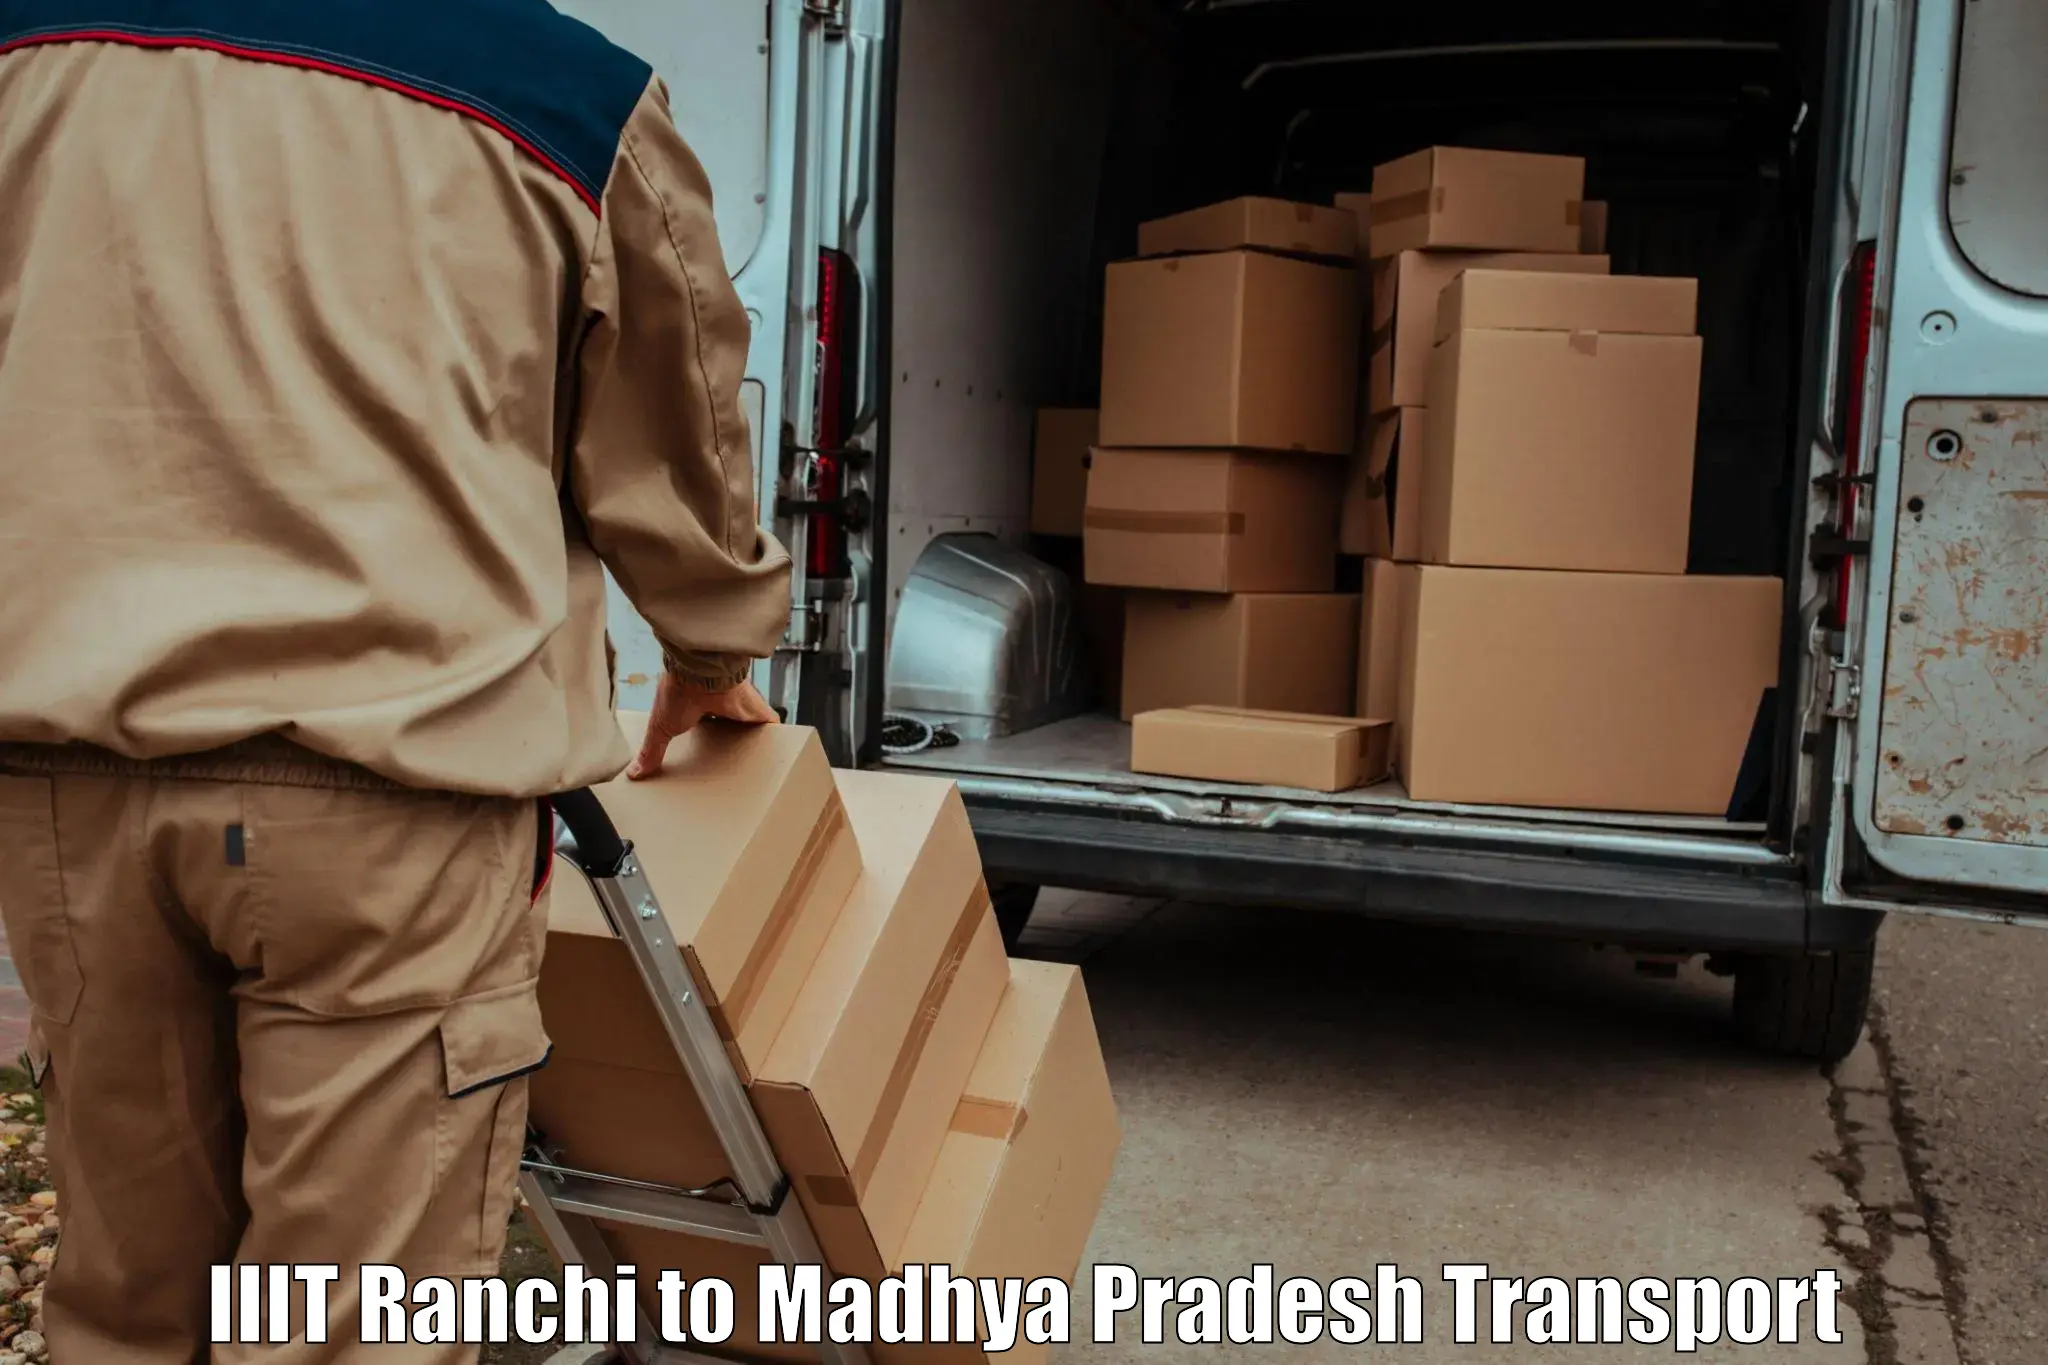 Air freight transport services IIIT Ranchi to Sheopur